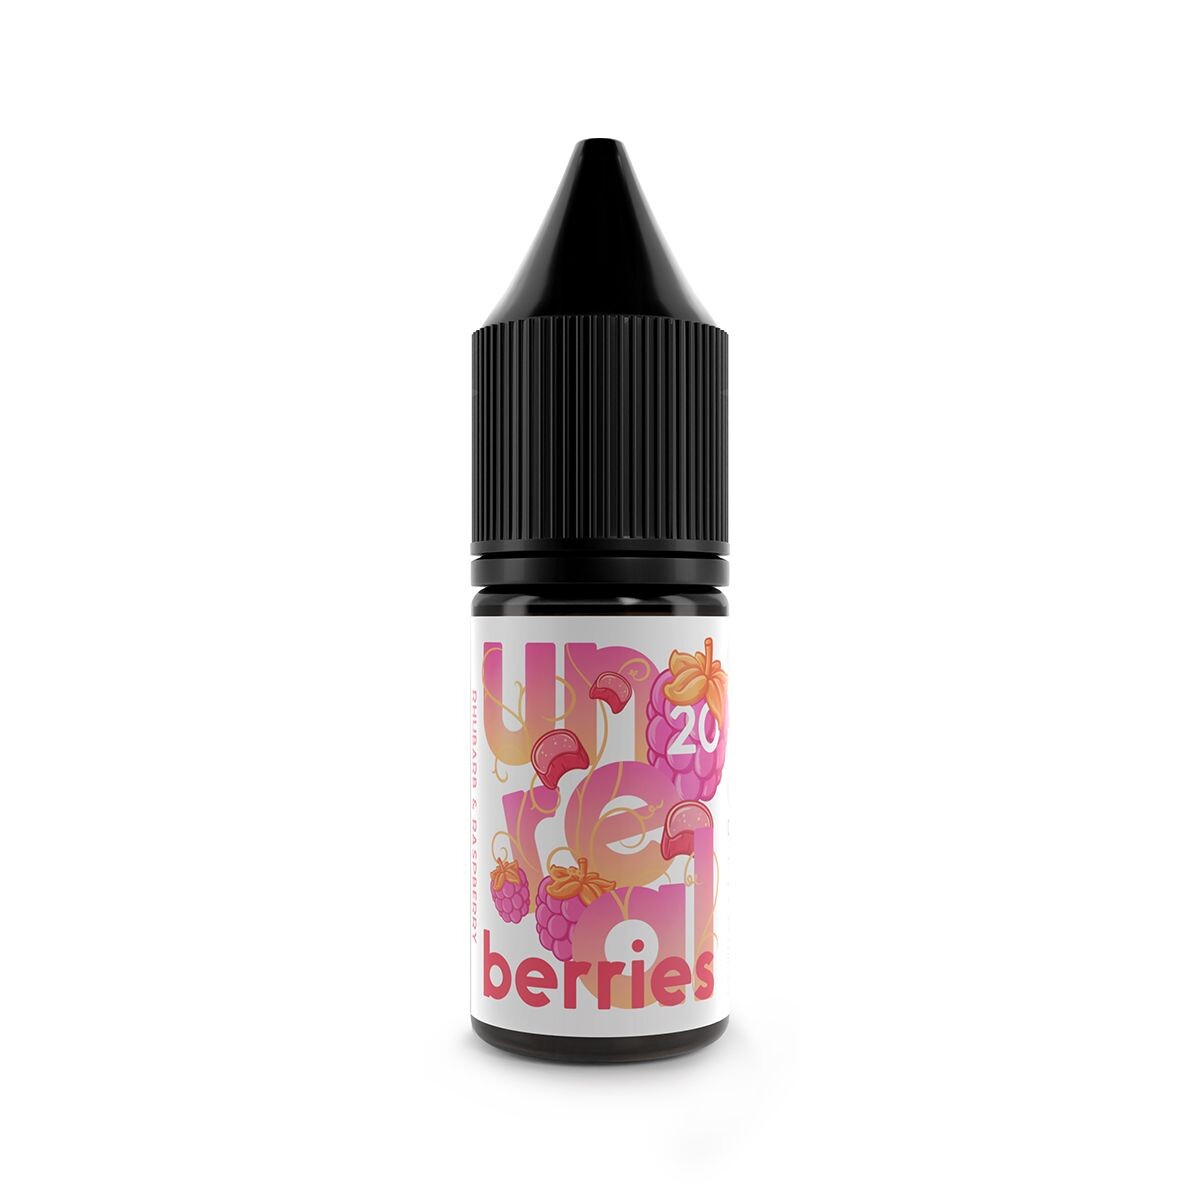 Rhubarb and Raspberry flavour e-liquid by unreal berries 10ml nic salt by Dispergo Vaping